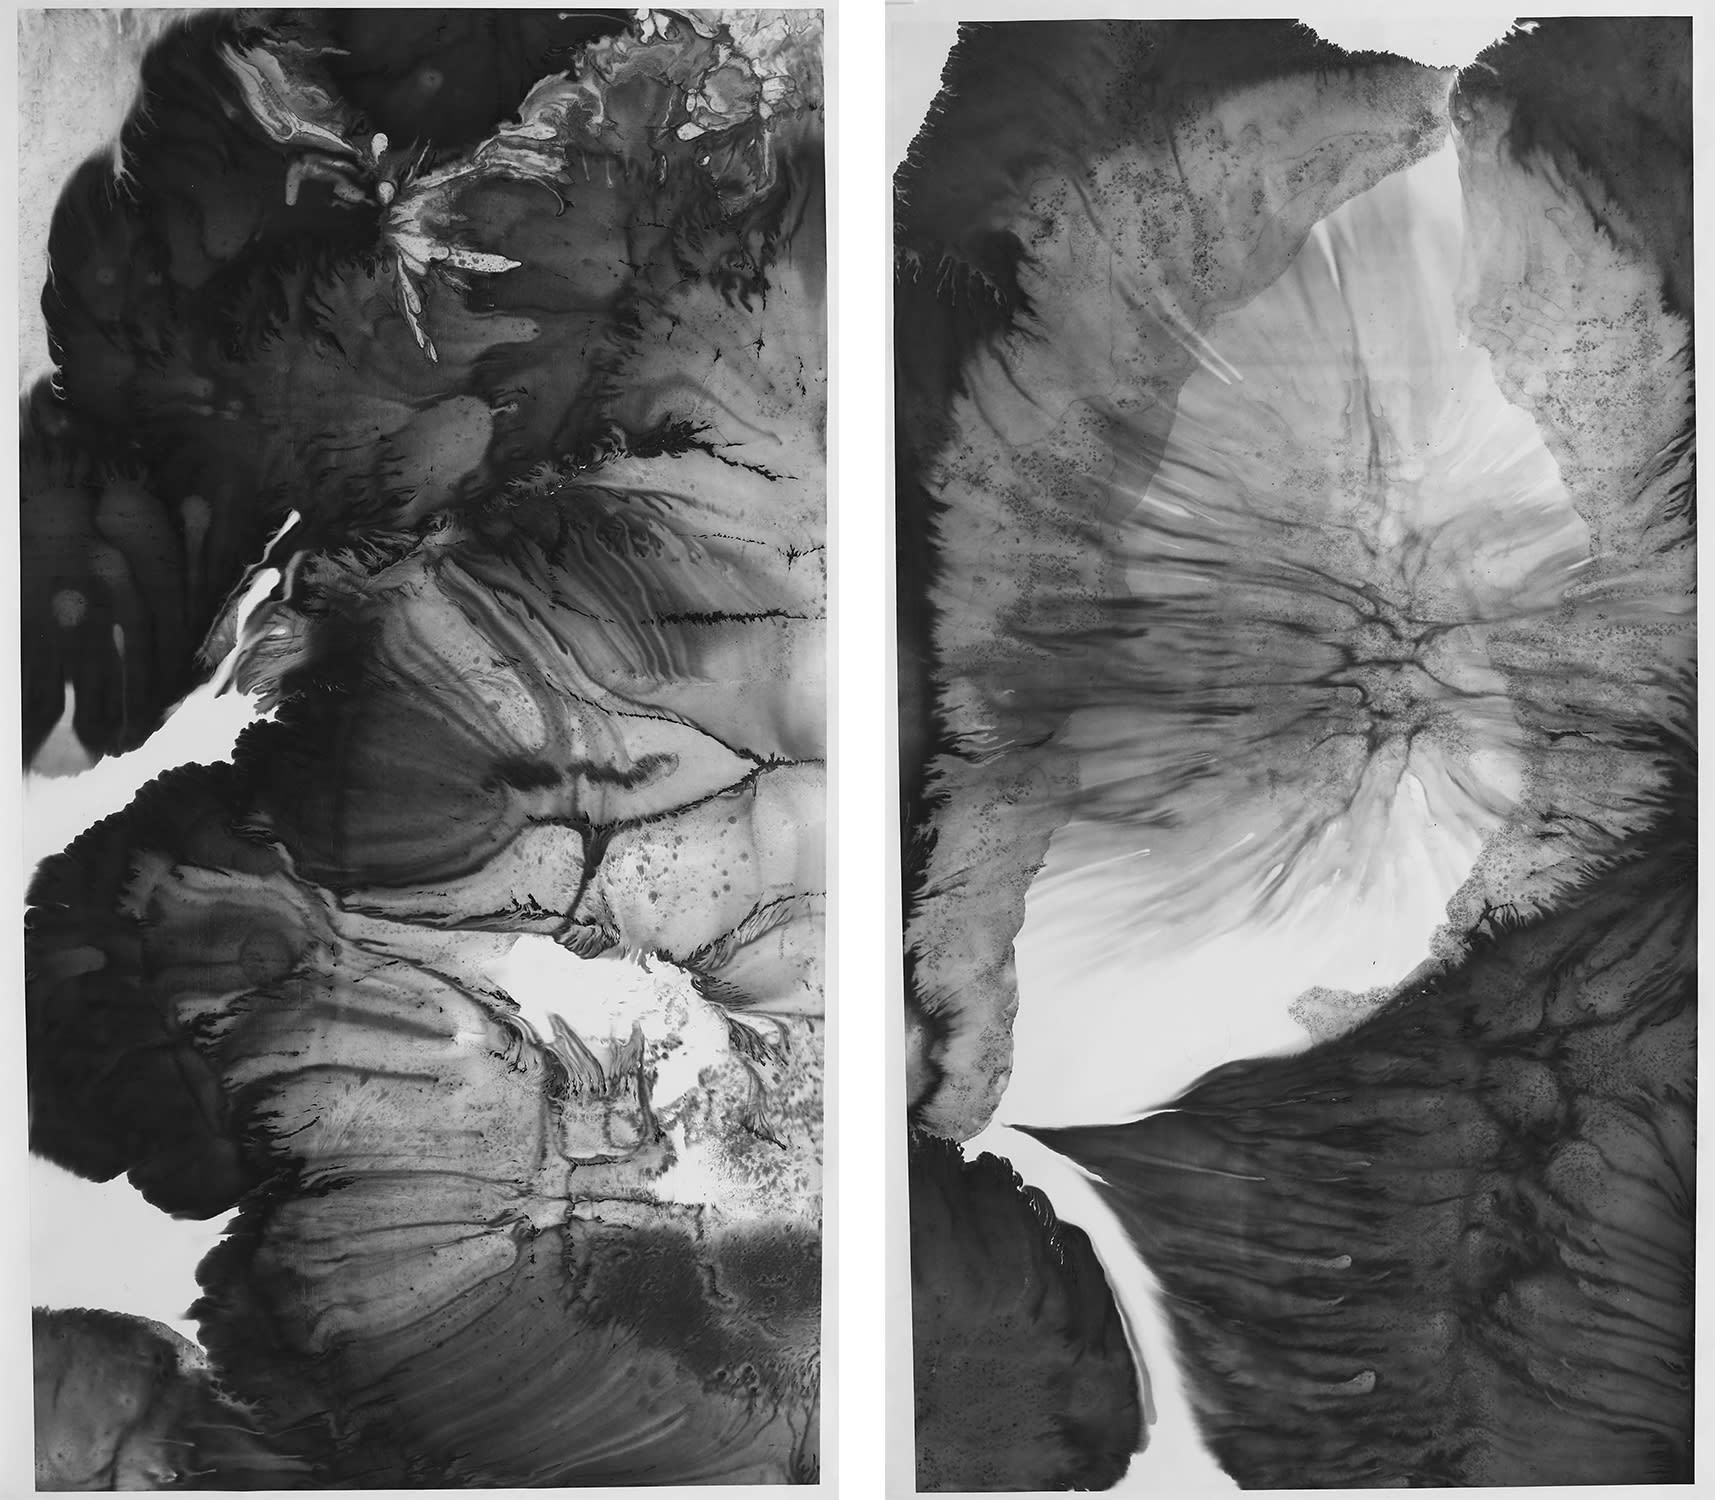 Left: Bingyi, Streams and Mountains, Myriad Flowers No.2, 2021 - 2022. Right: Bingyi, Streams and Mountains, Myriad Flowers No.4, 2021 - 2022. Courtesy of the artist and Ink Studio, Beijing.